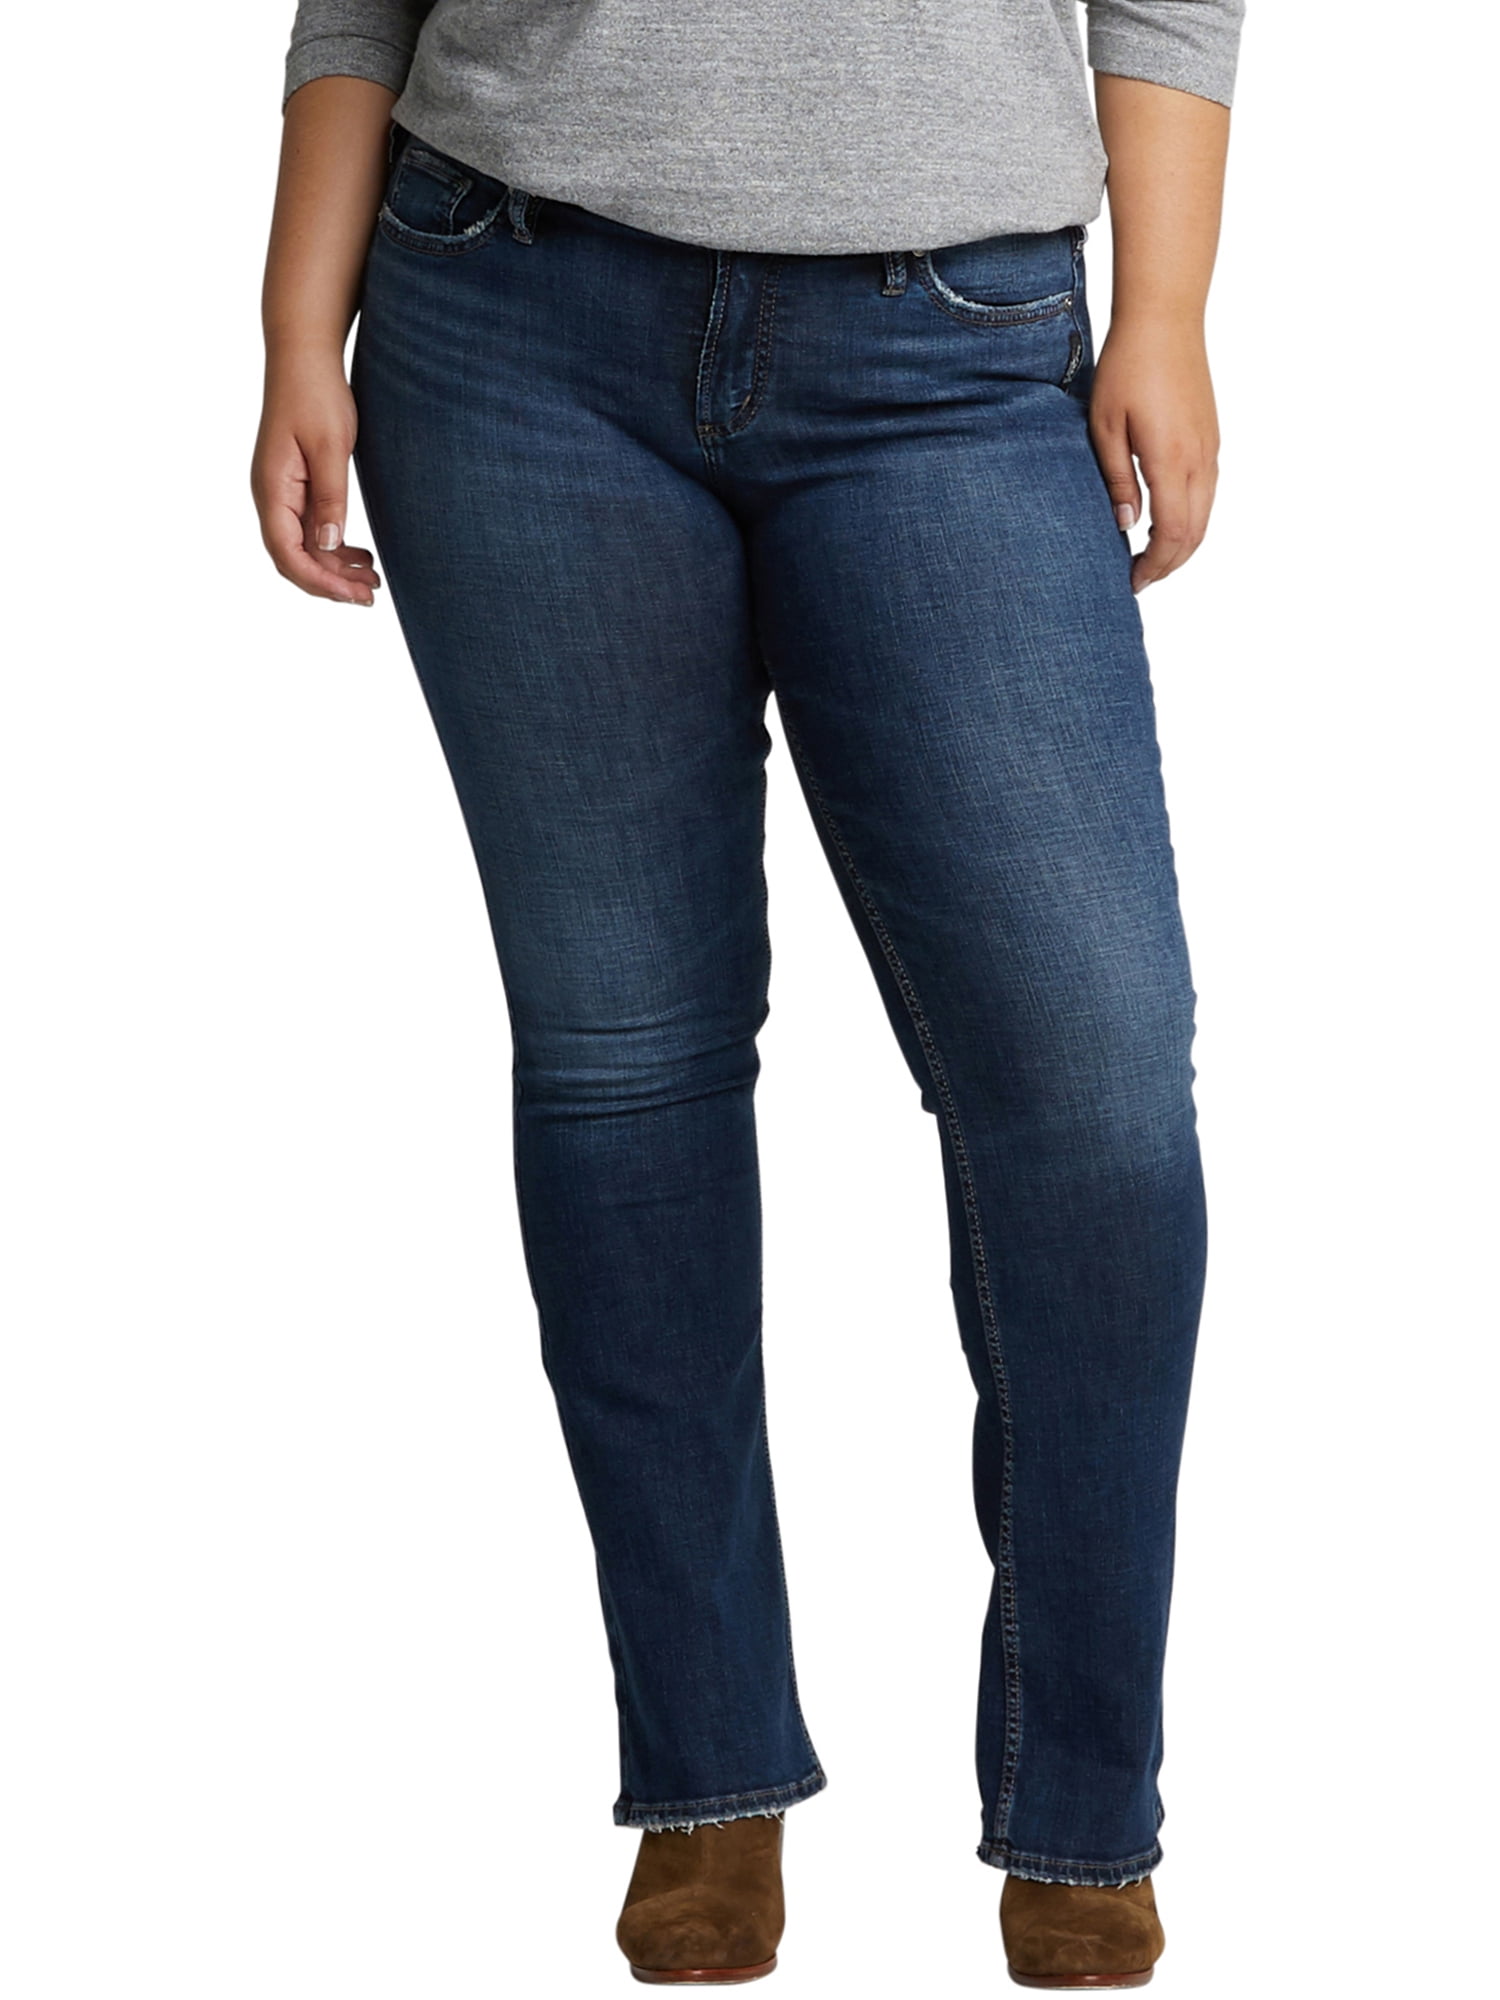 Savings and offers available Silver Jeans Women's Plus-Size Suki Mid ...